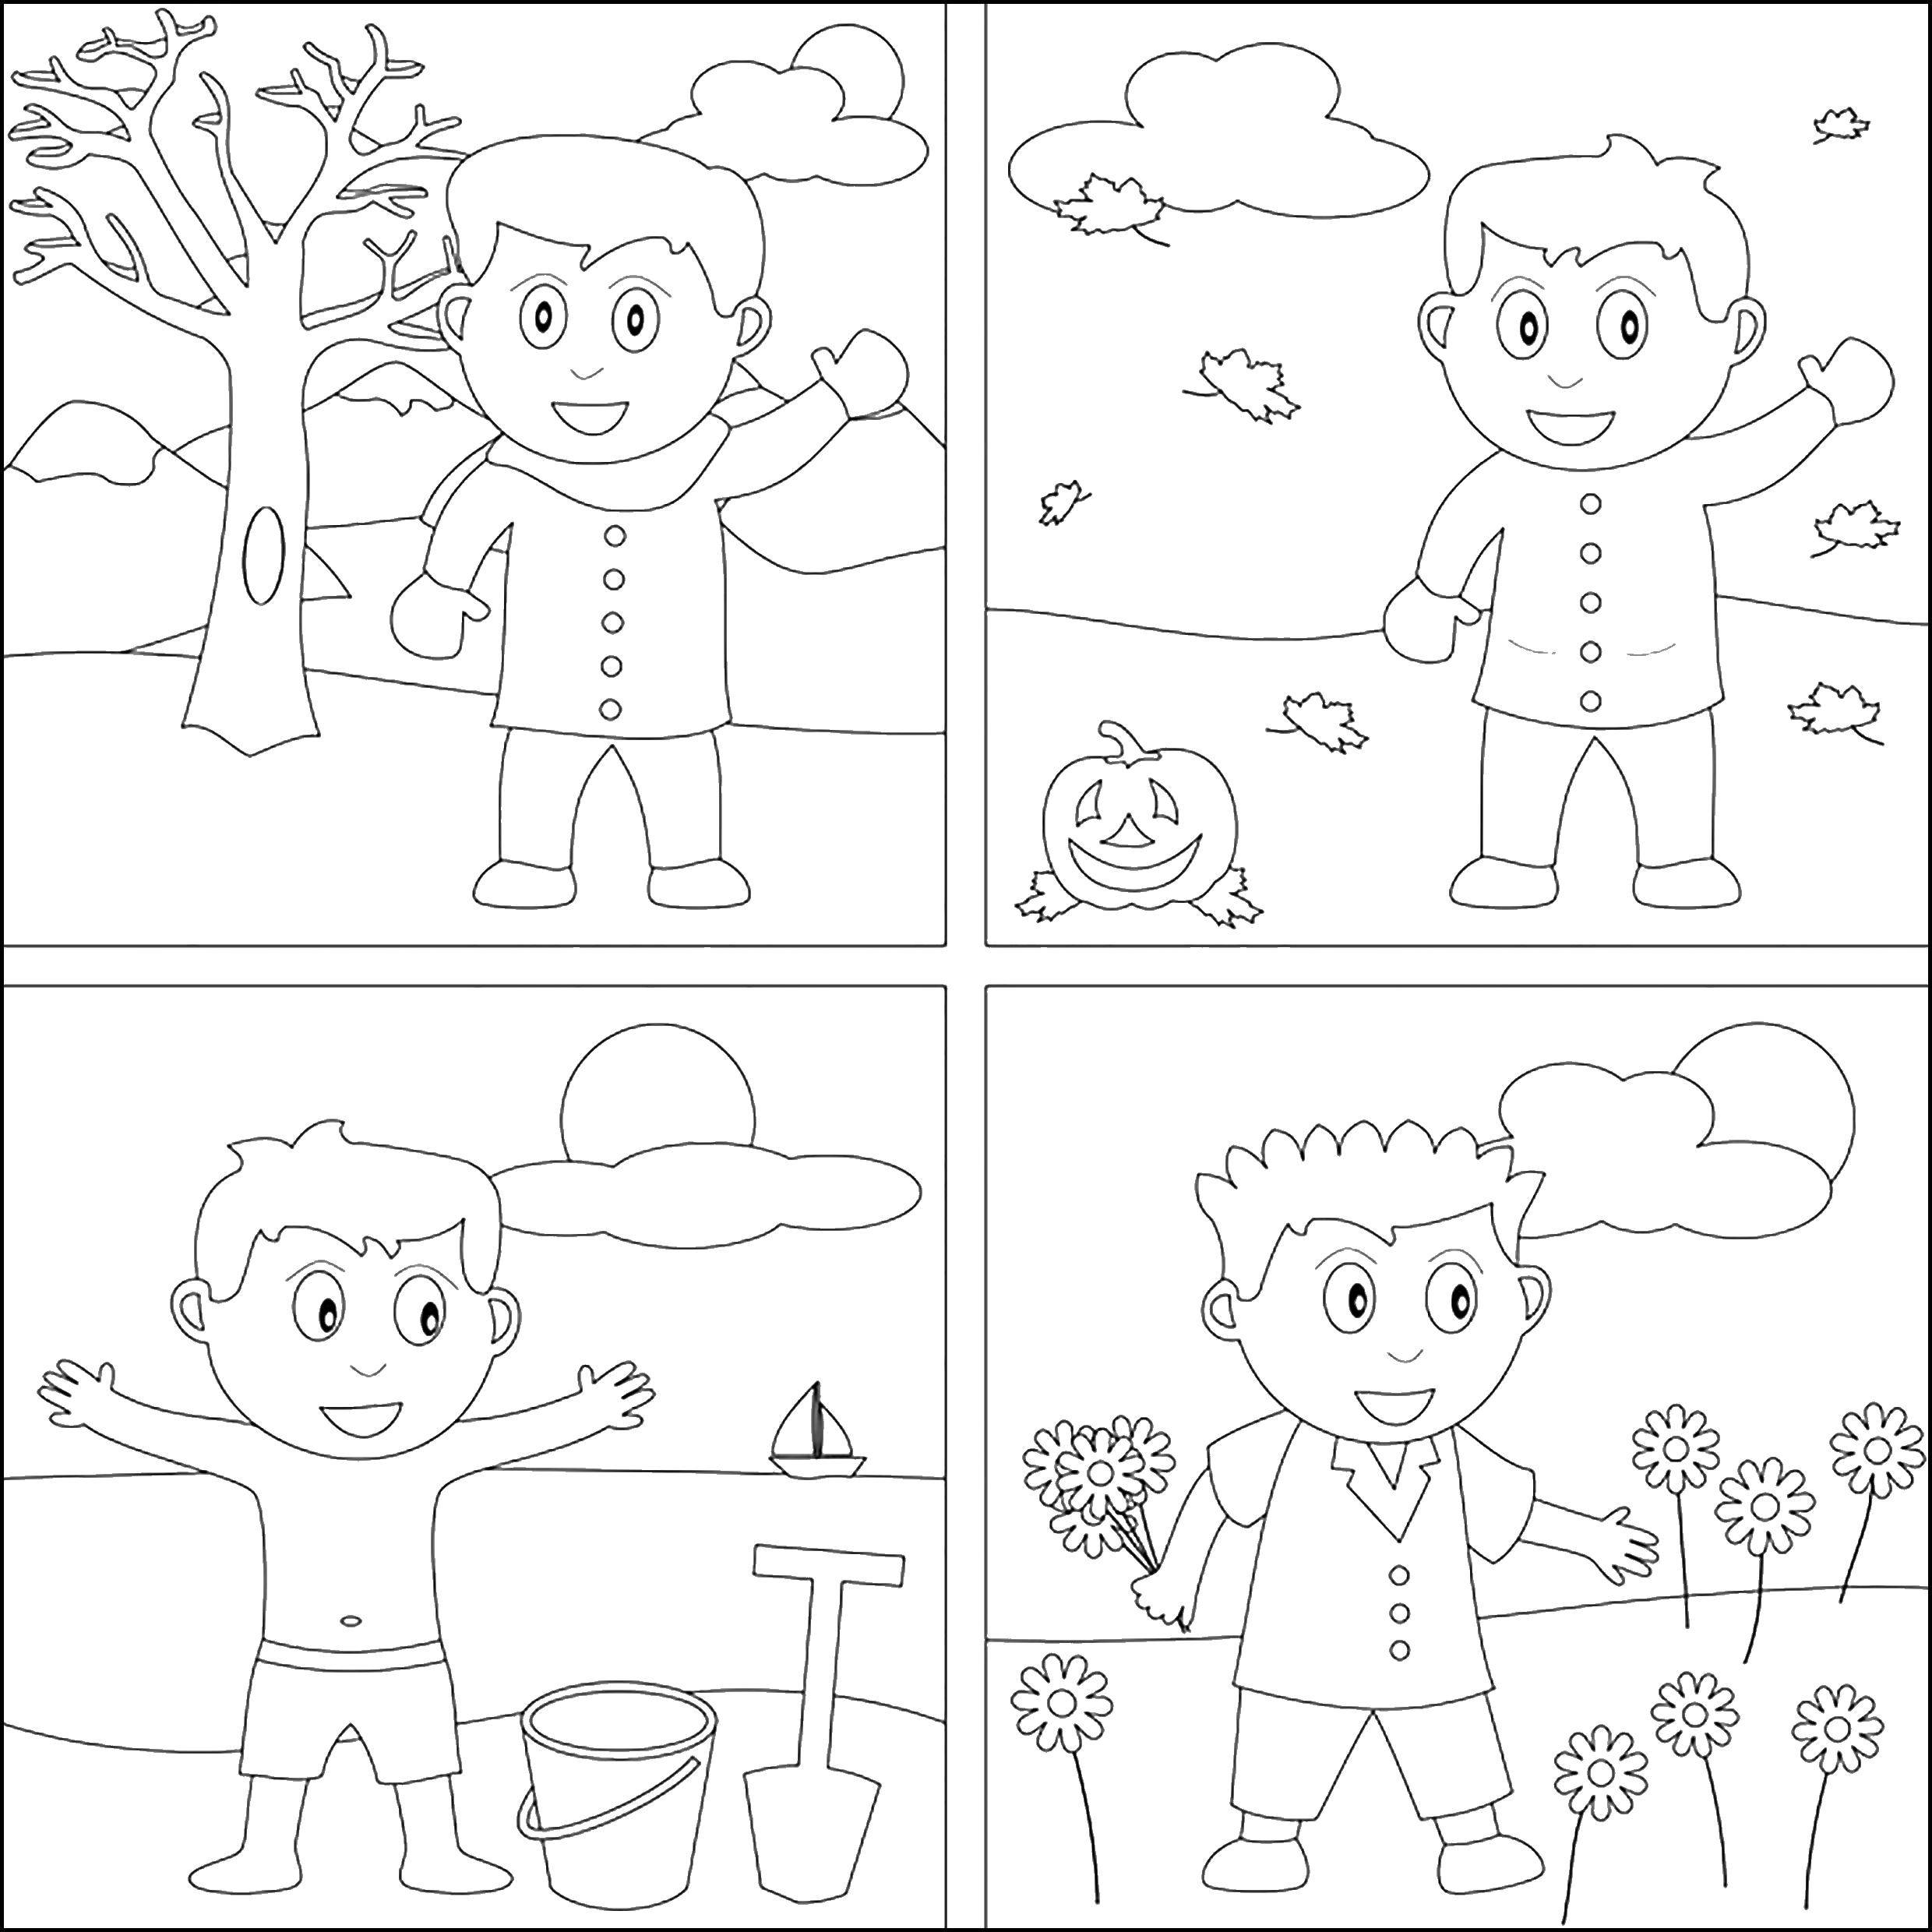 Coloring The boy and the seasons. Category coloring. Tags:  seasons, boy.